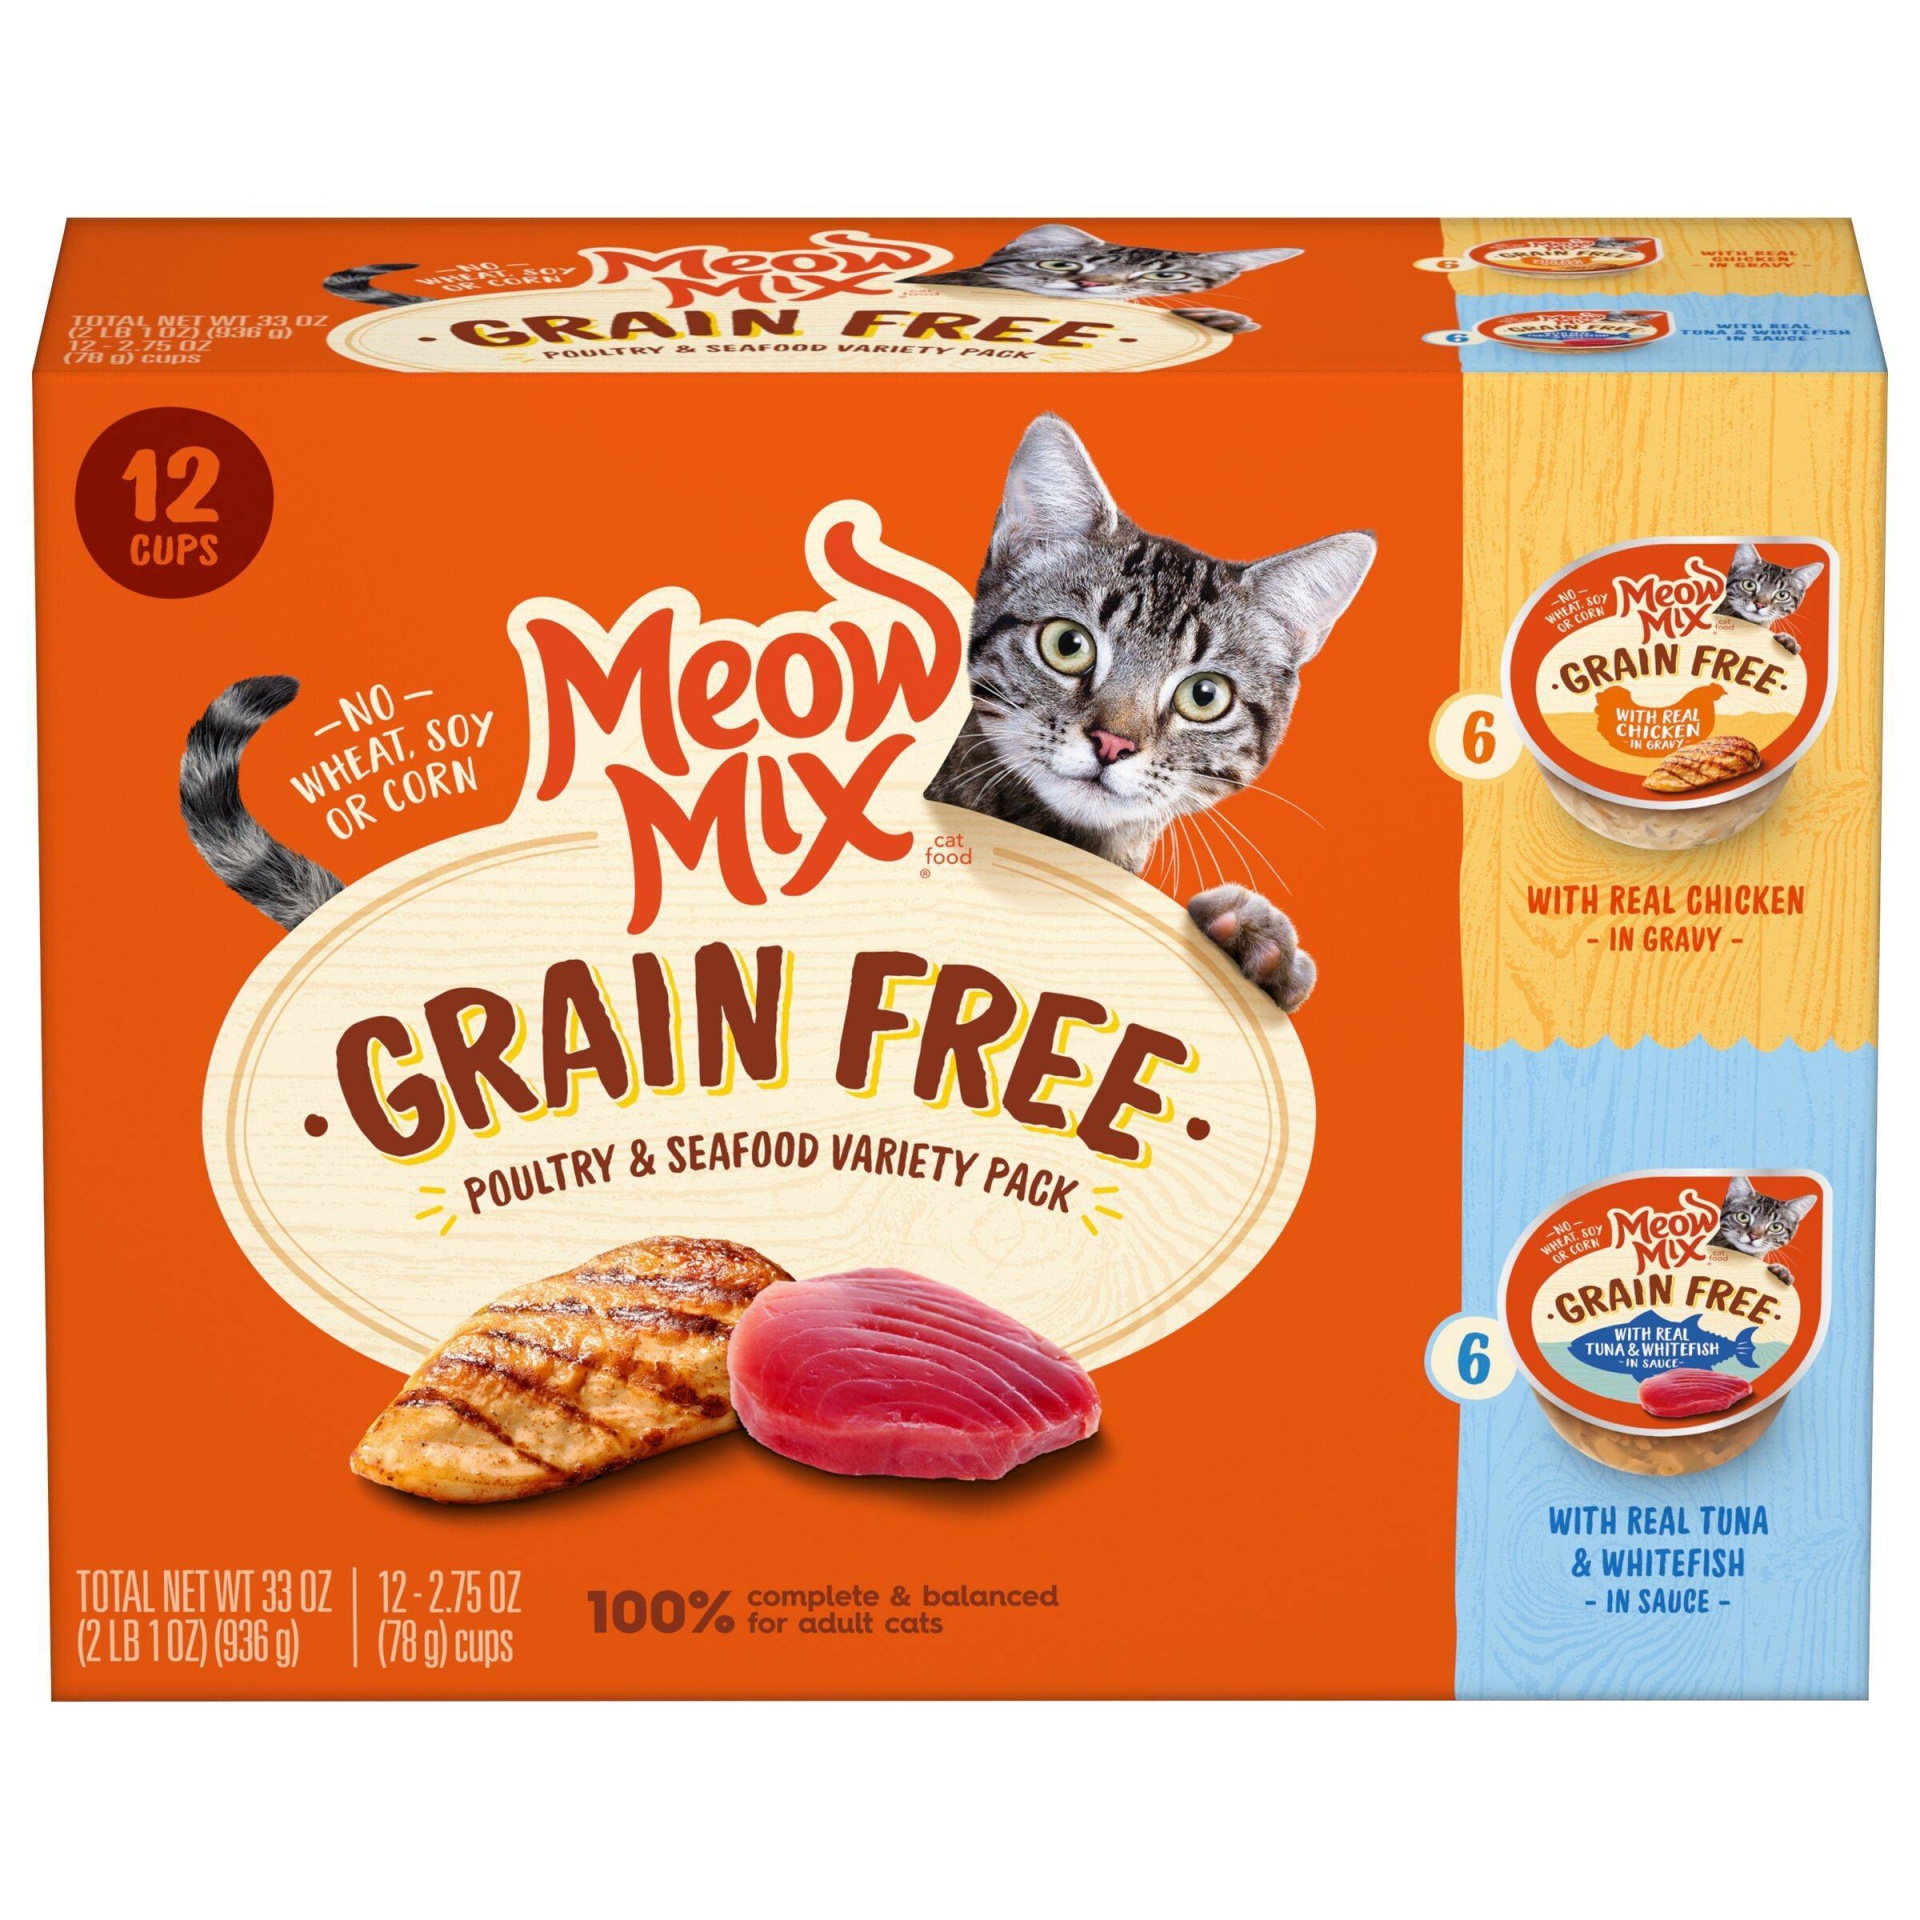 slide 1 of 1, Meow Mix Grain Free Poultry & Seafood Variety Pack with Real Chicken in Gravy, Real Tuna and Whitefish in Sauce cups, 12 ct; 2.75 oz